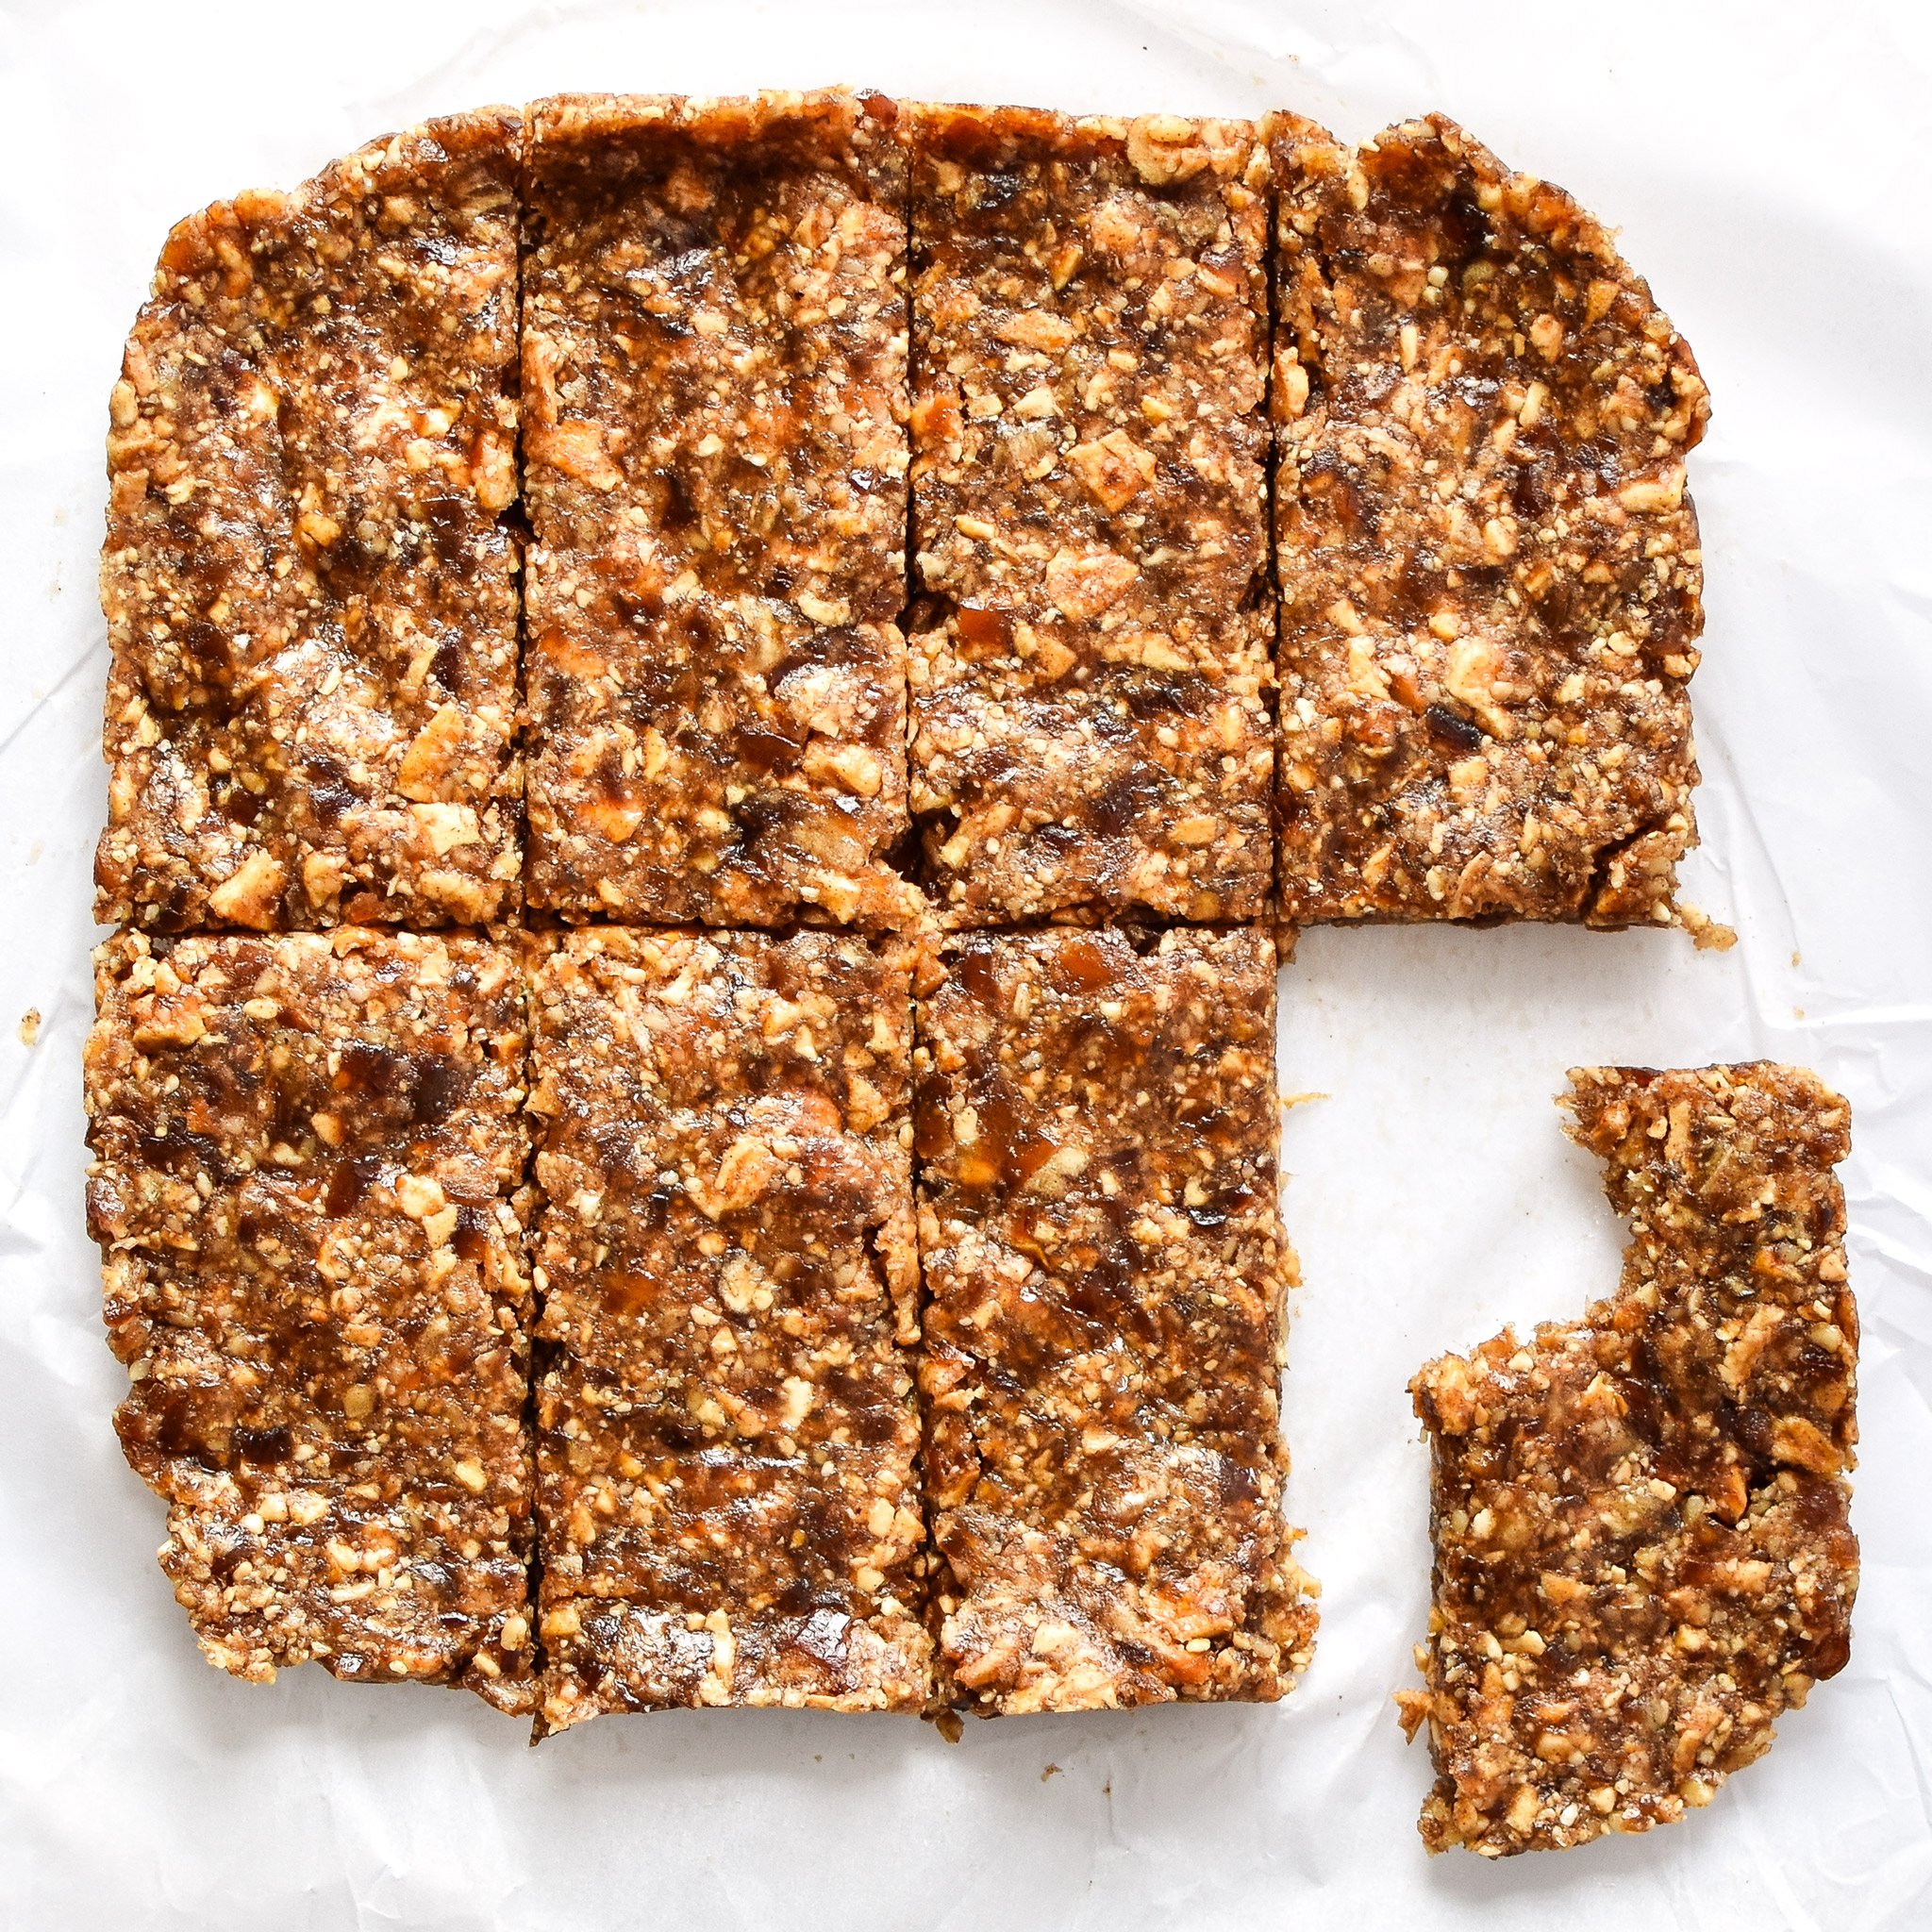 No-Bake Cinnamon Apple Date Bars - These No-Bake Cinnamon Apple Date Bars are naturally sweetened with dates and take just a few minutes to prepare - without heating up the oven! - ProjectMealPlan.com